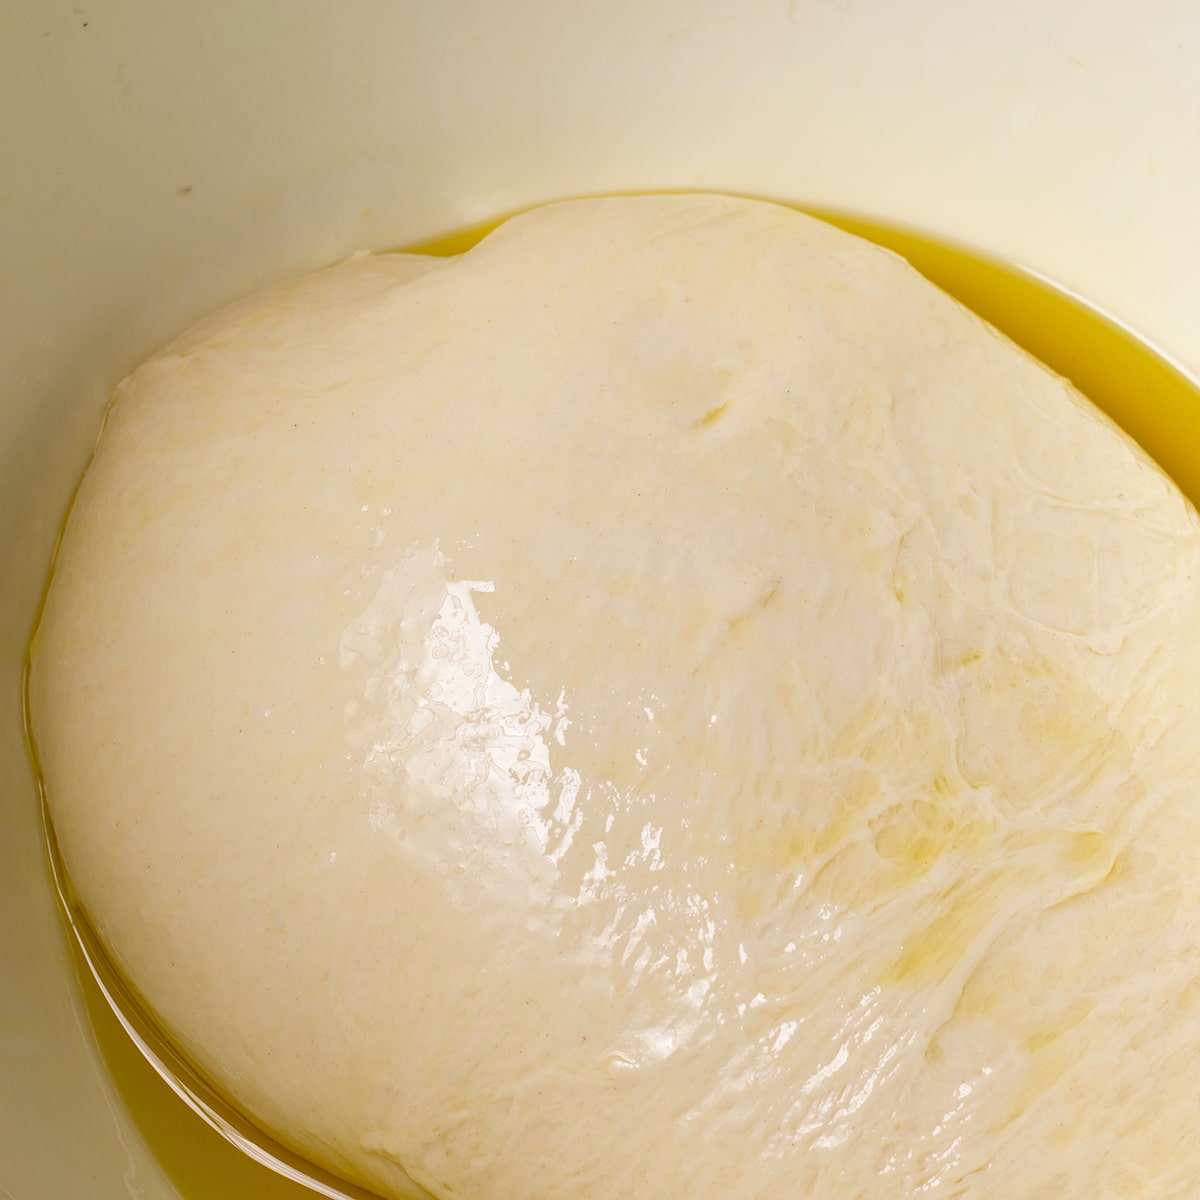 Pizza dough coated with olive oil inside a mixing bowl.